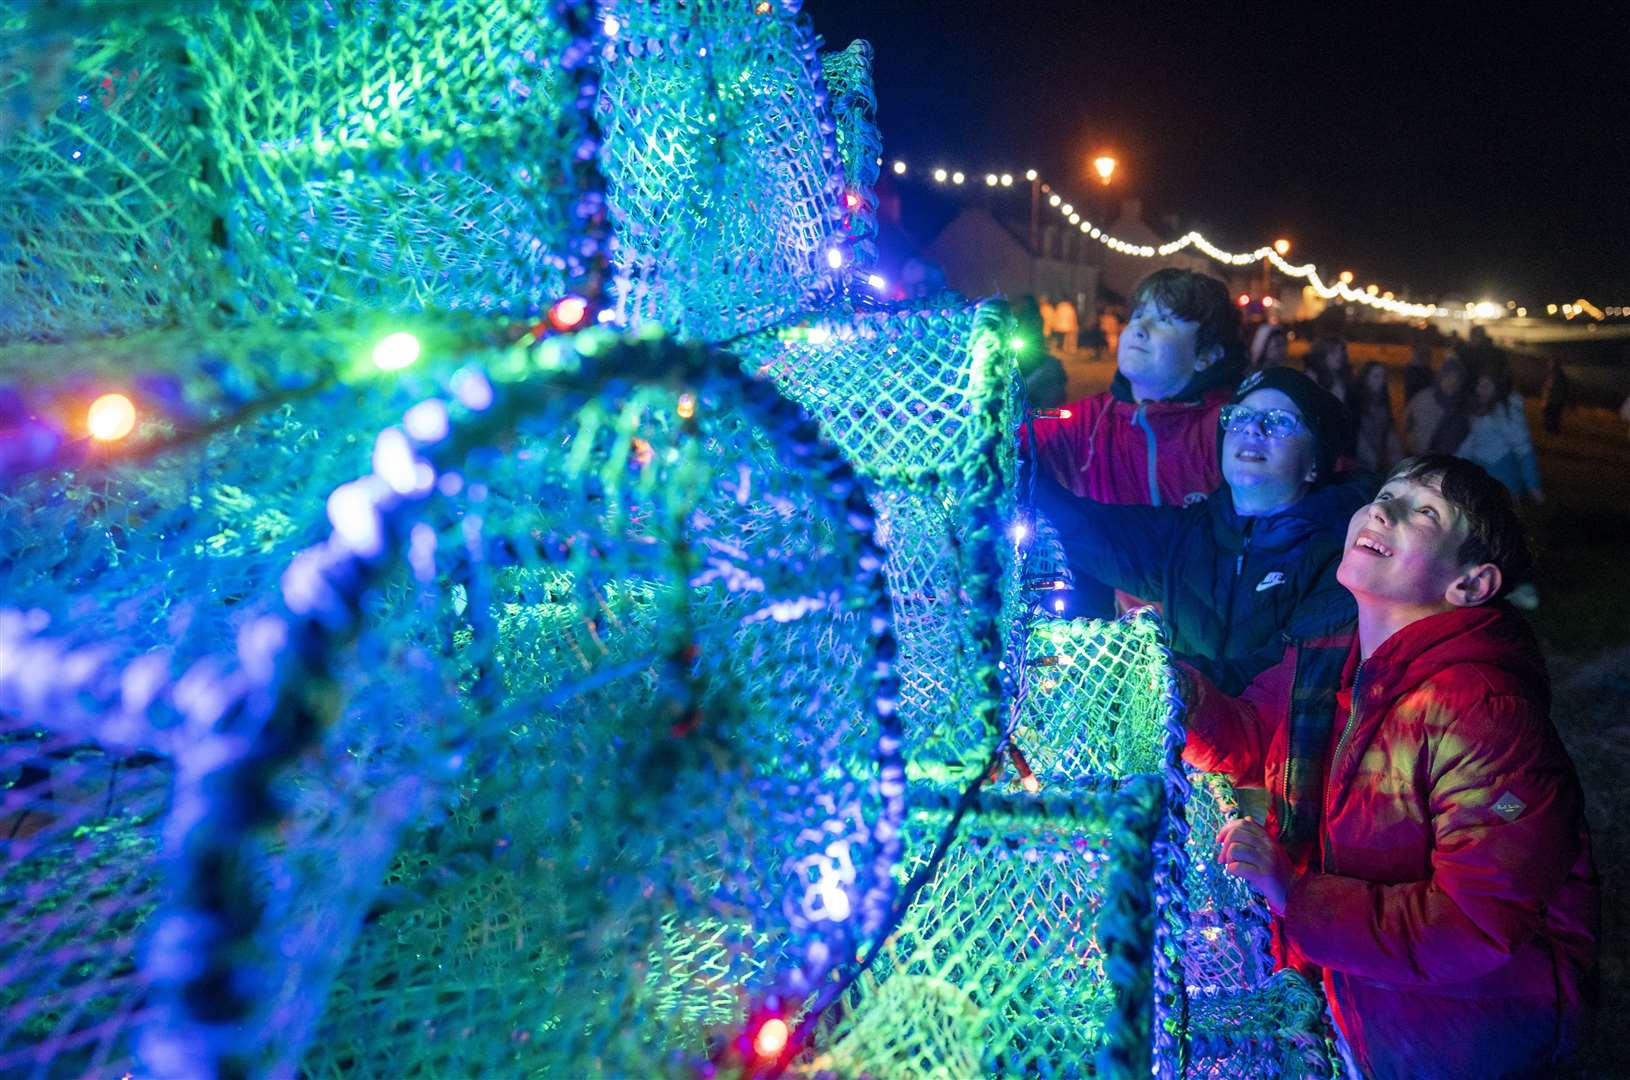 Luca Mowbrary, 12; Dan MacRae, 11; and Daniel Mason, also 11, take a closer look at the lights on the Christmas tree made of fishing creels on the harbour-side in the Scottish village of Ullapool (Jane Barlow/PA)